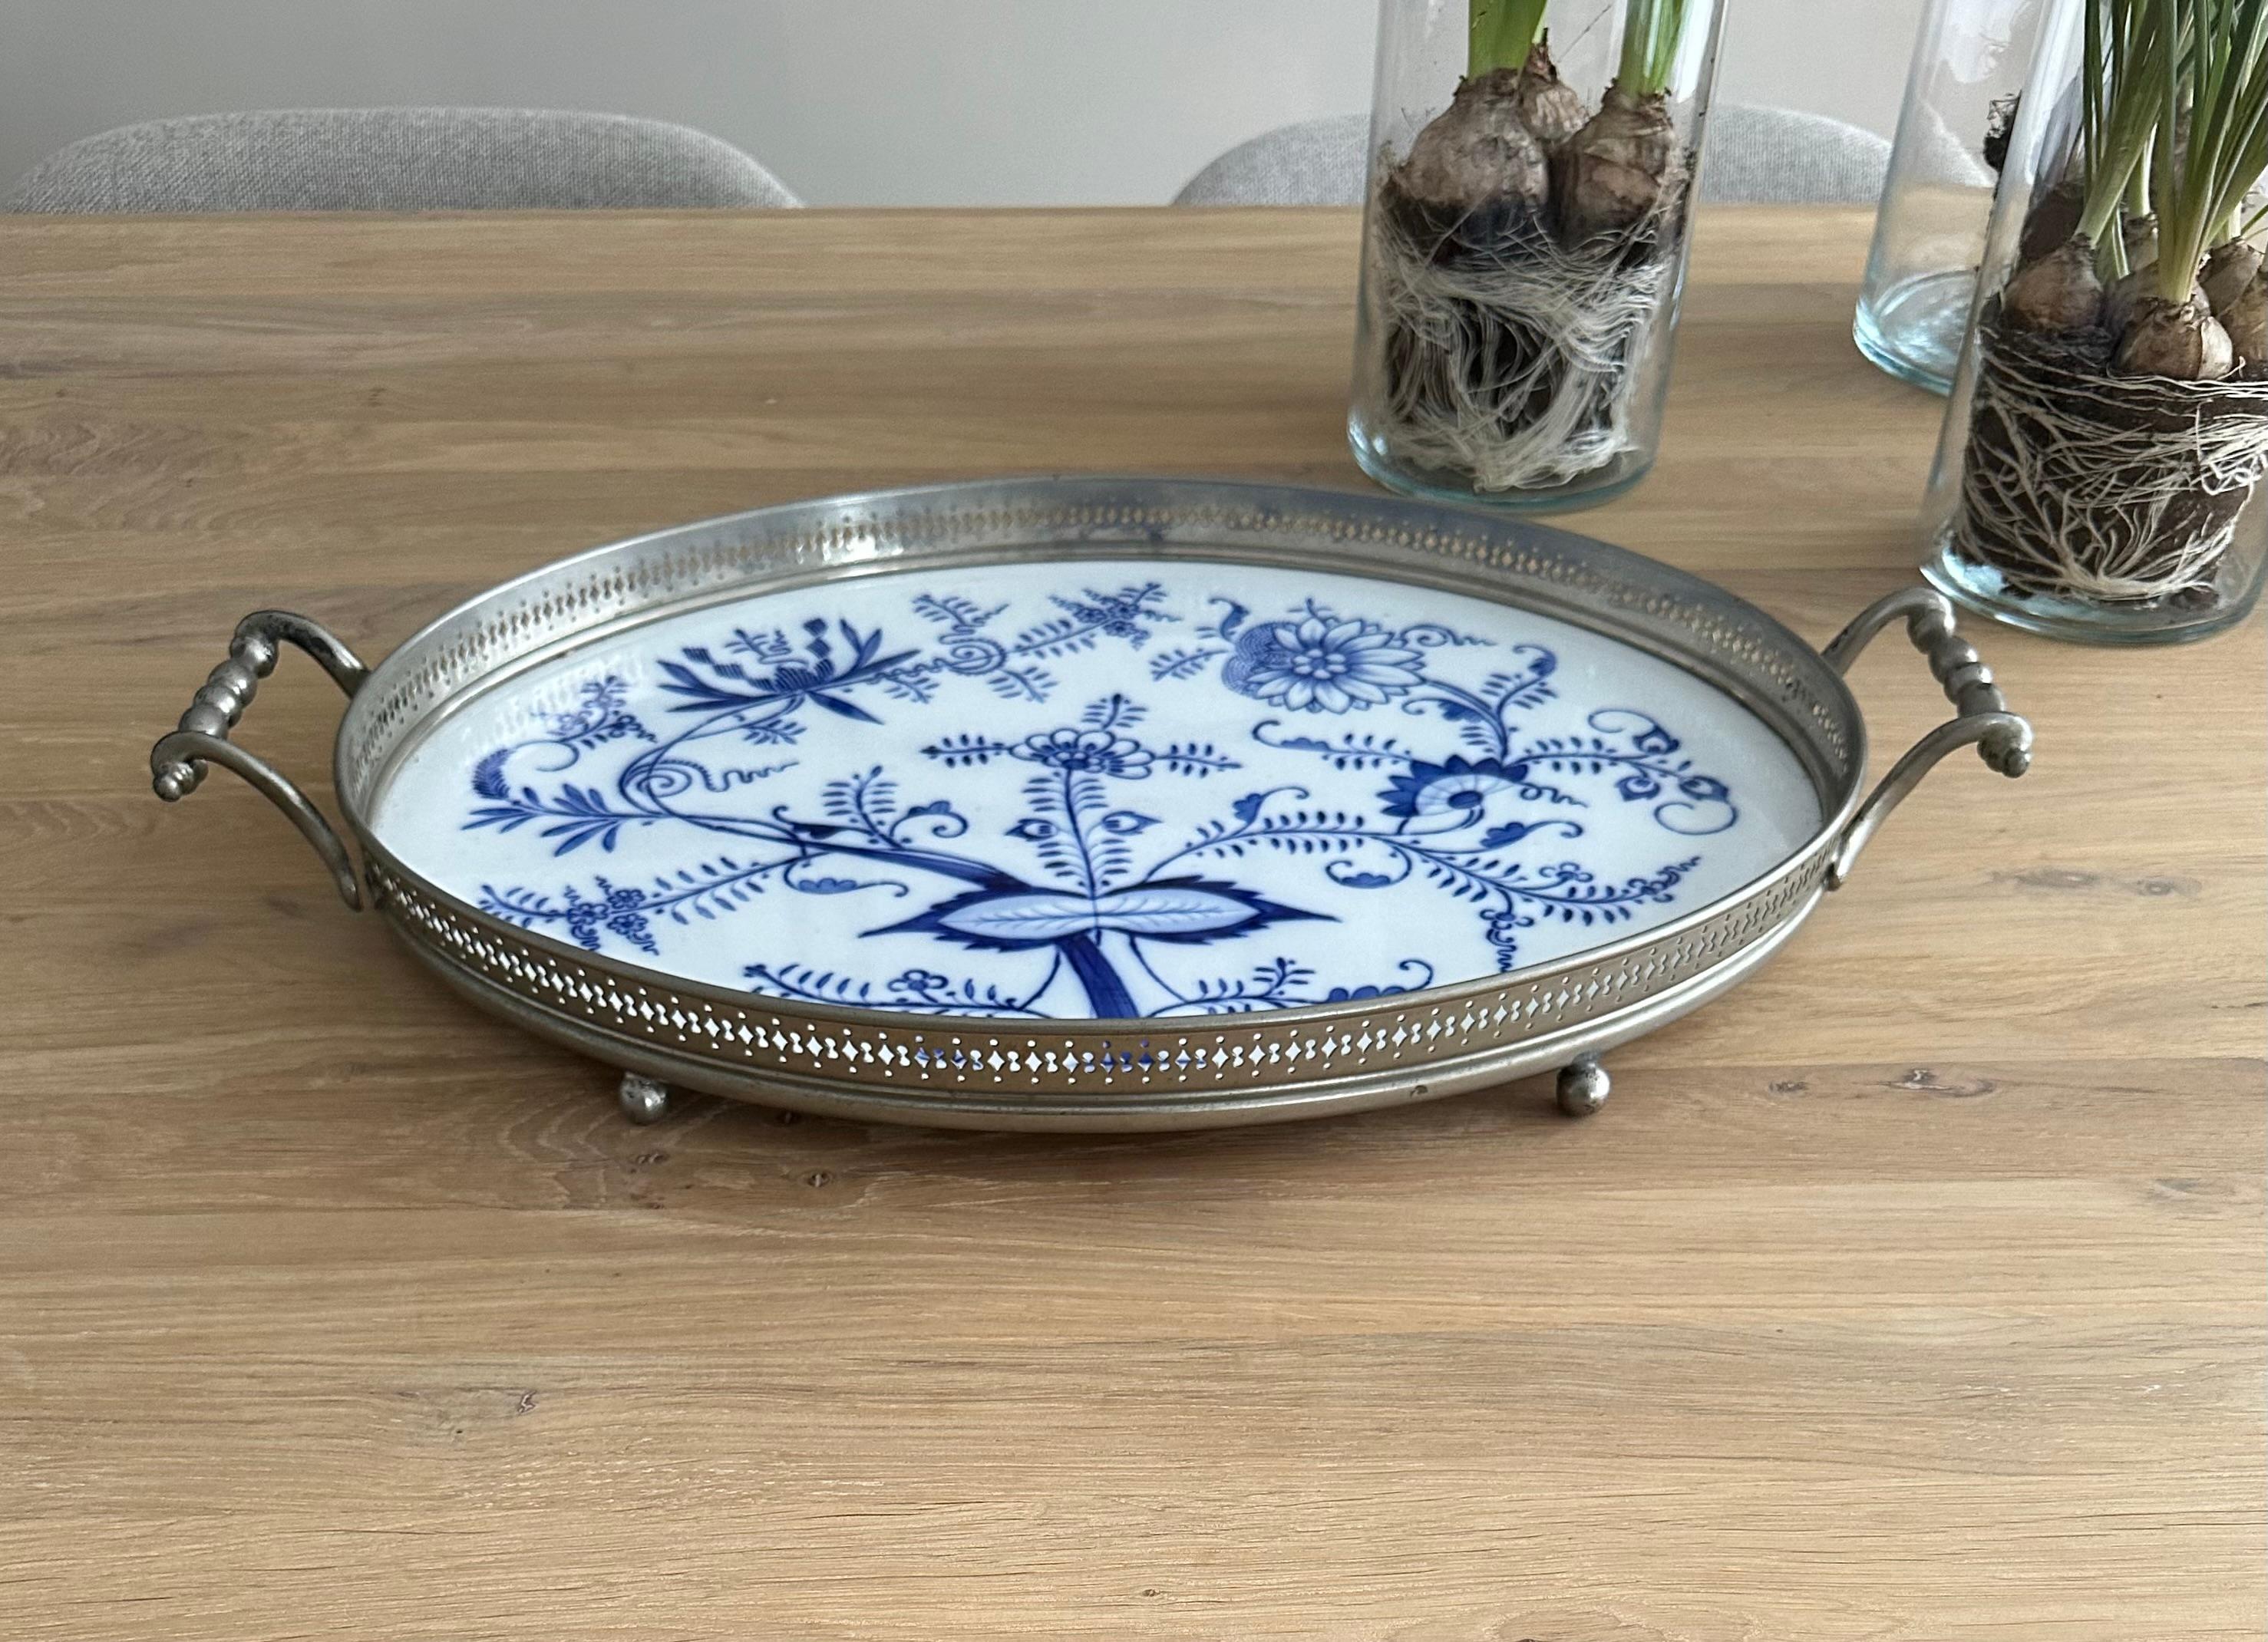 Antique and excellent condition, delftware serving tray.

This rare size serving tray with the beautiful, hand painted leafs and flower pattern is in excellent condition and it dates from the earliest years of the 20th century. Inlaid inside the